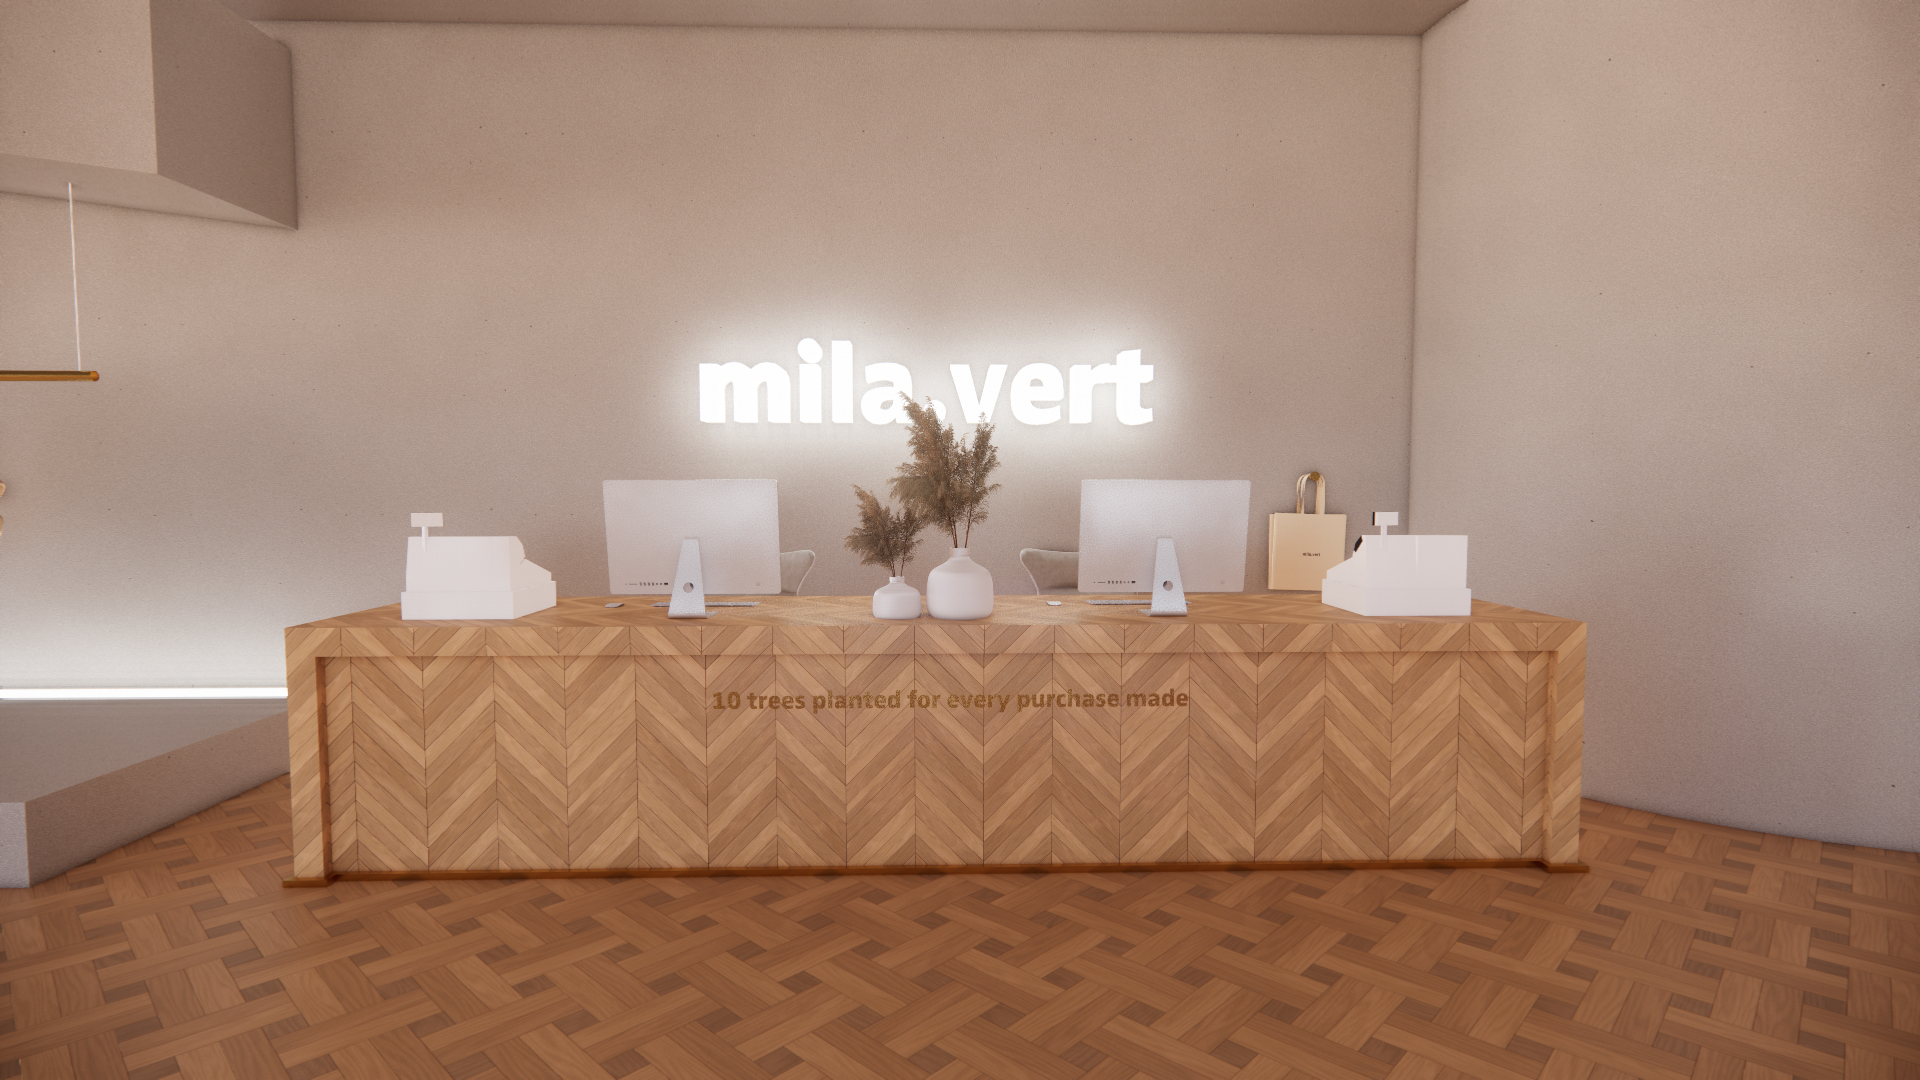 The front desk of my mila.vert store project. Designed to be modern whilst utilising sustainable materials.